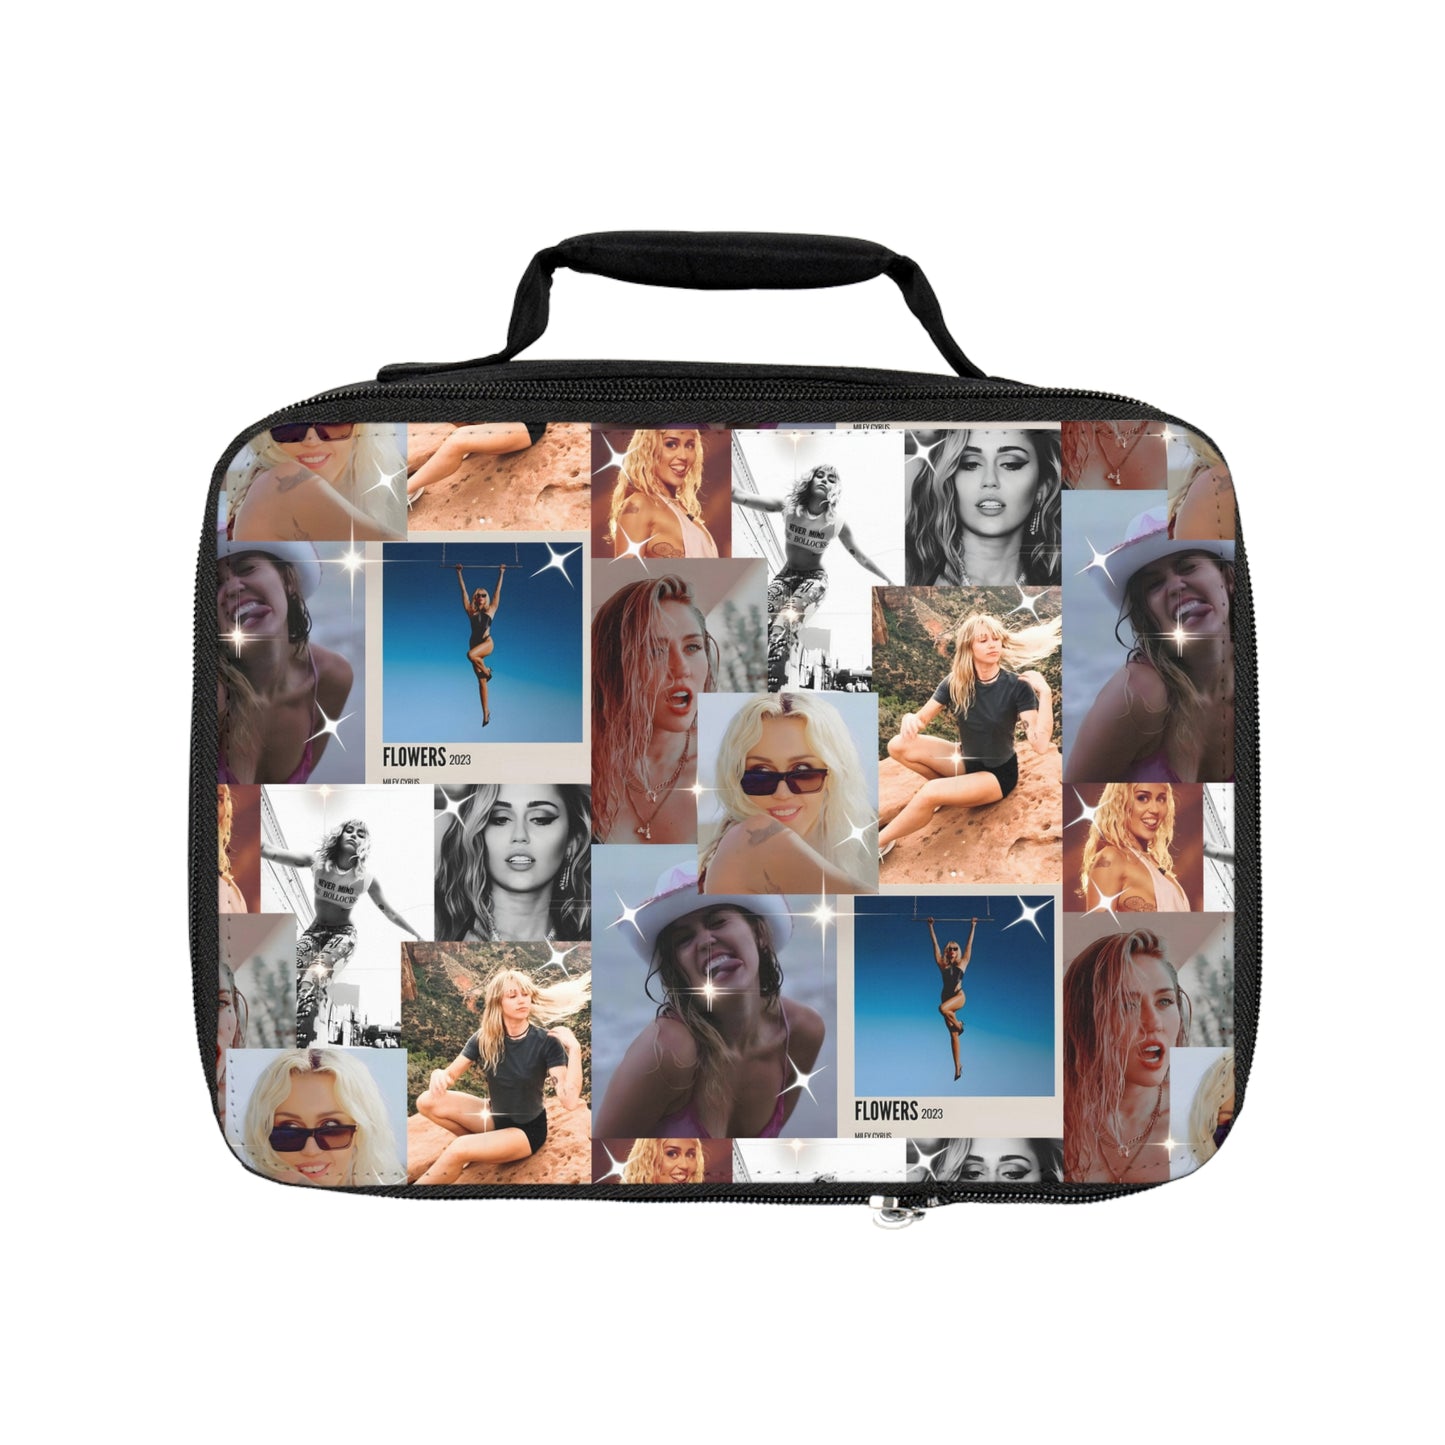 Miley Cyrus Flowers Photo Collage Lunch Bag